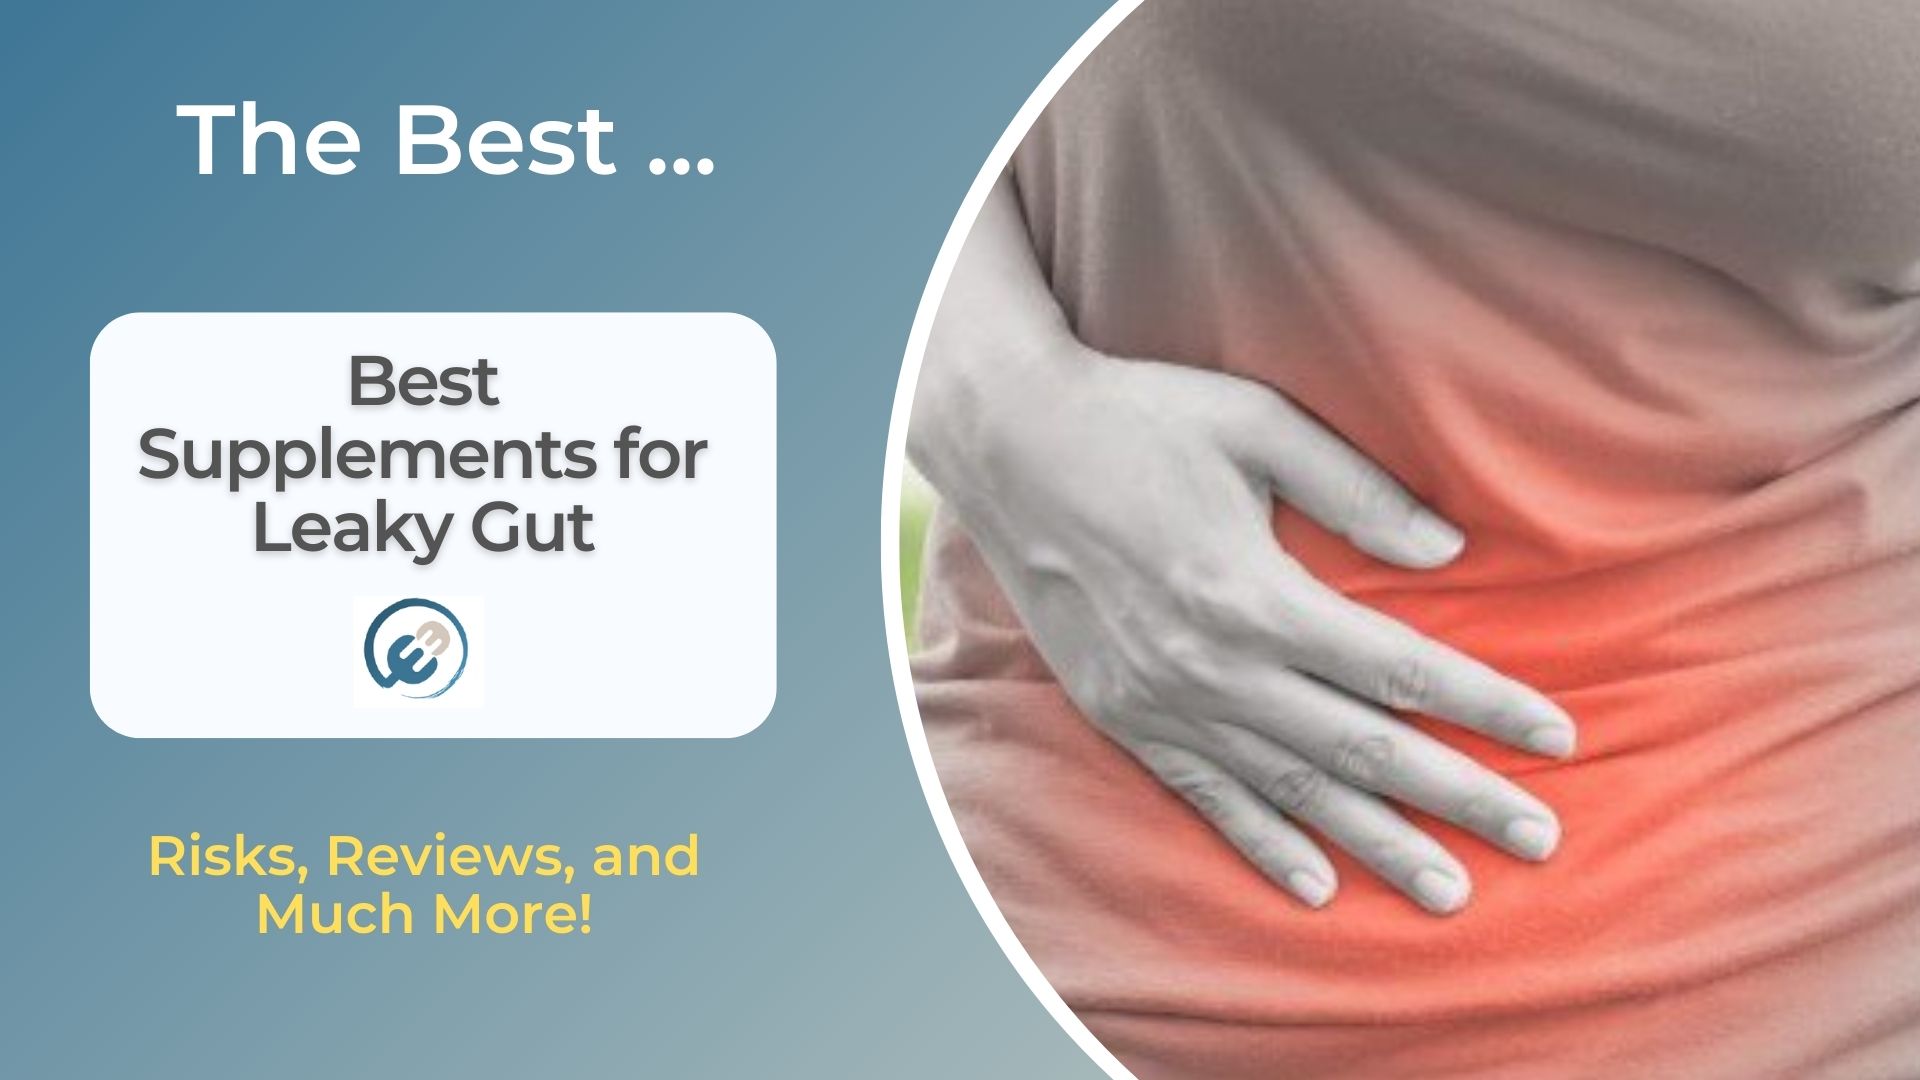 Best Supplements for Leaky Gut